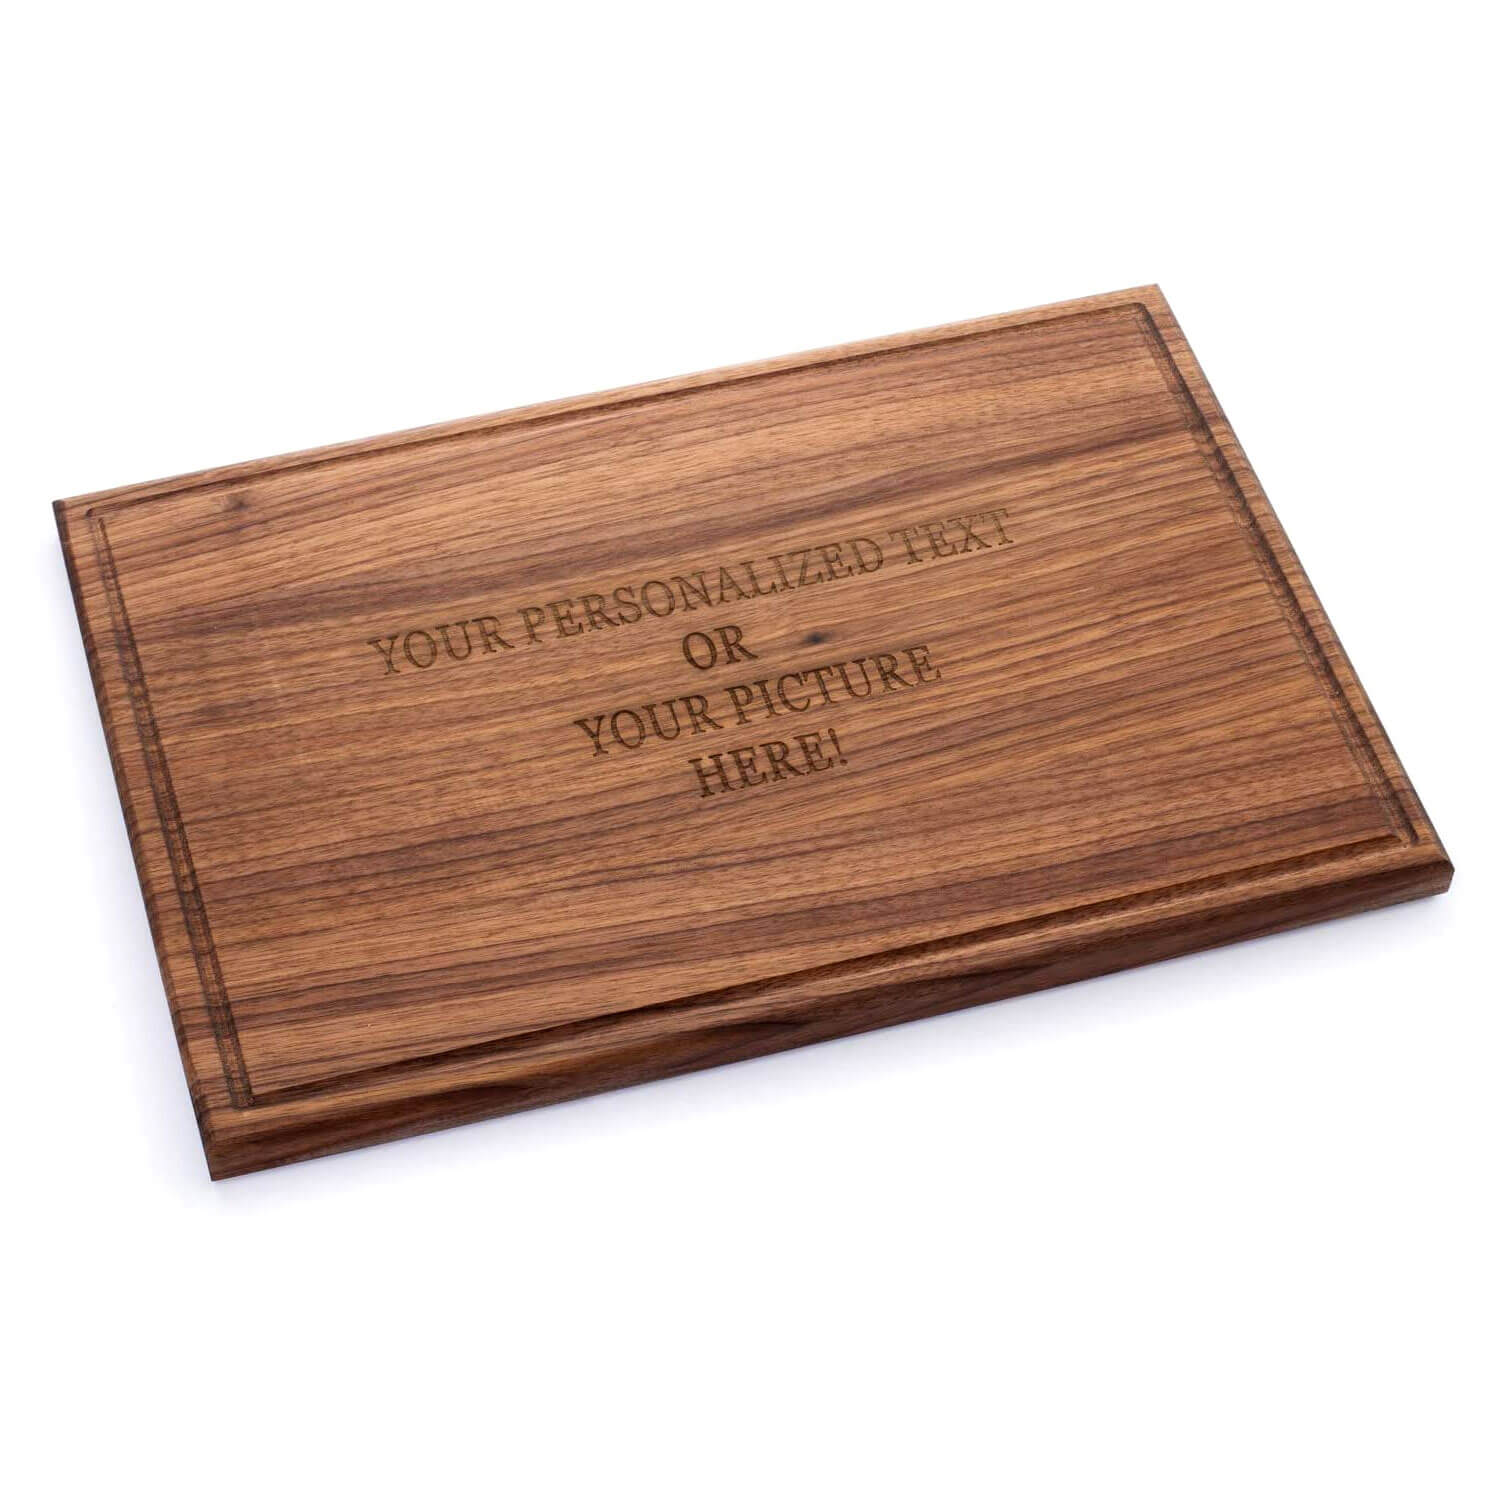 https://cdn.shopify.com/s/files/1/0515/2440/3381/products/large-wooden-cutting-board-with-individual-engraving-walnut-44-x-30-2-cm-tuuli-331.jpg